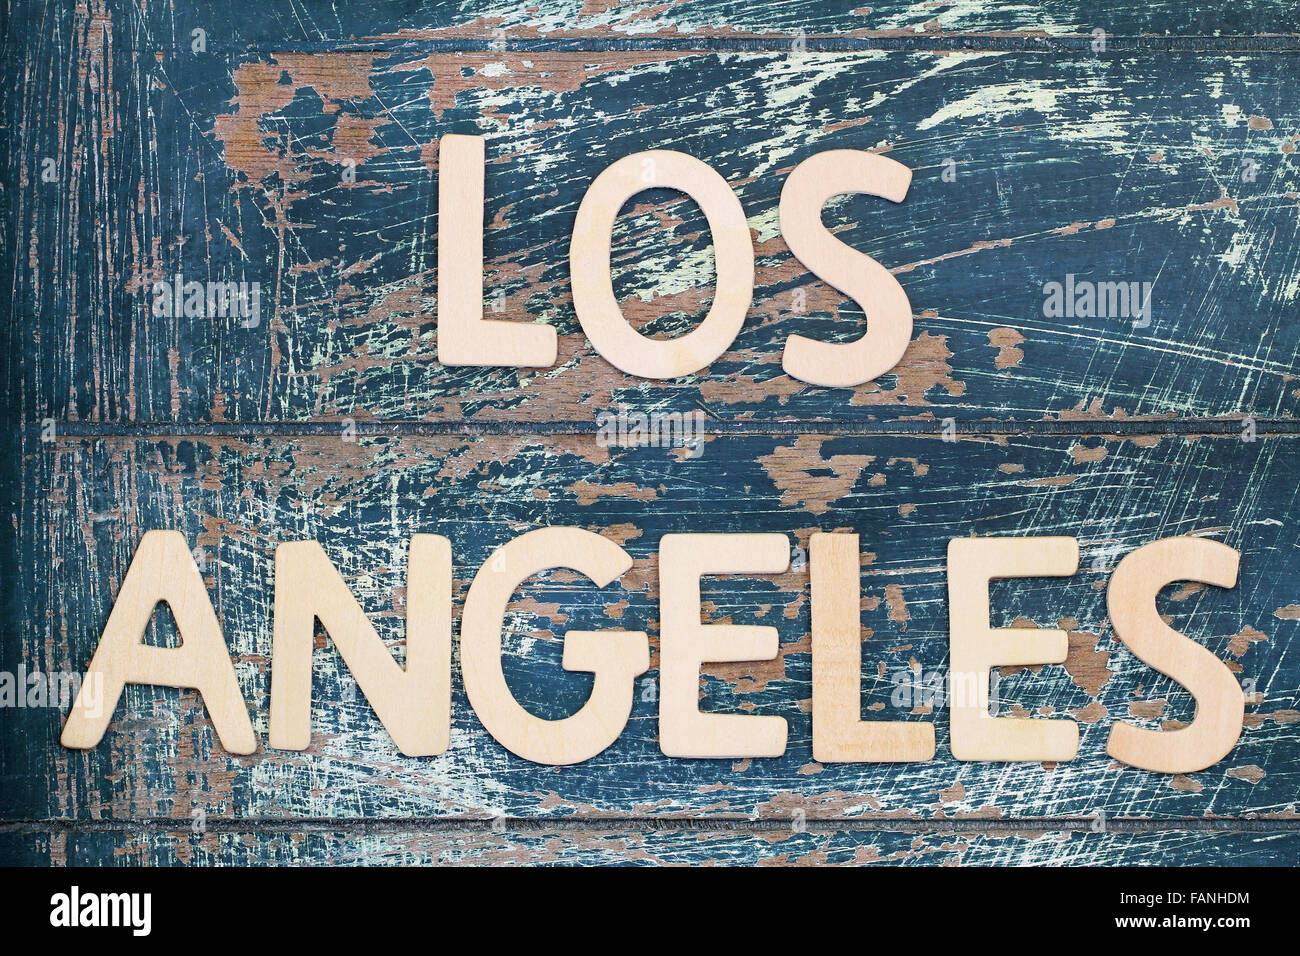 Los Angeles written with wooden letters on rustic surface Stock